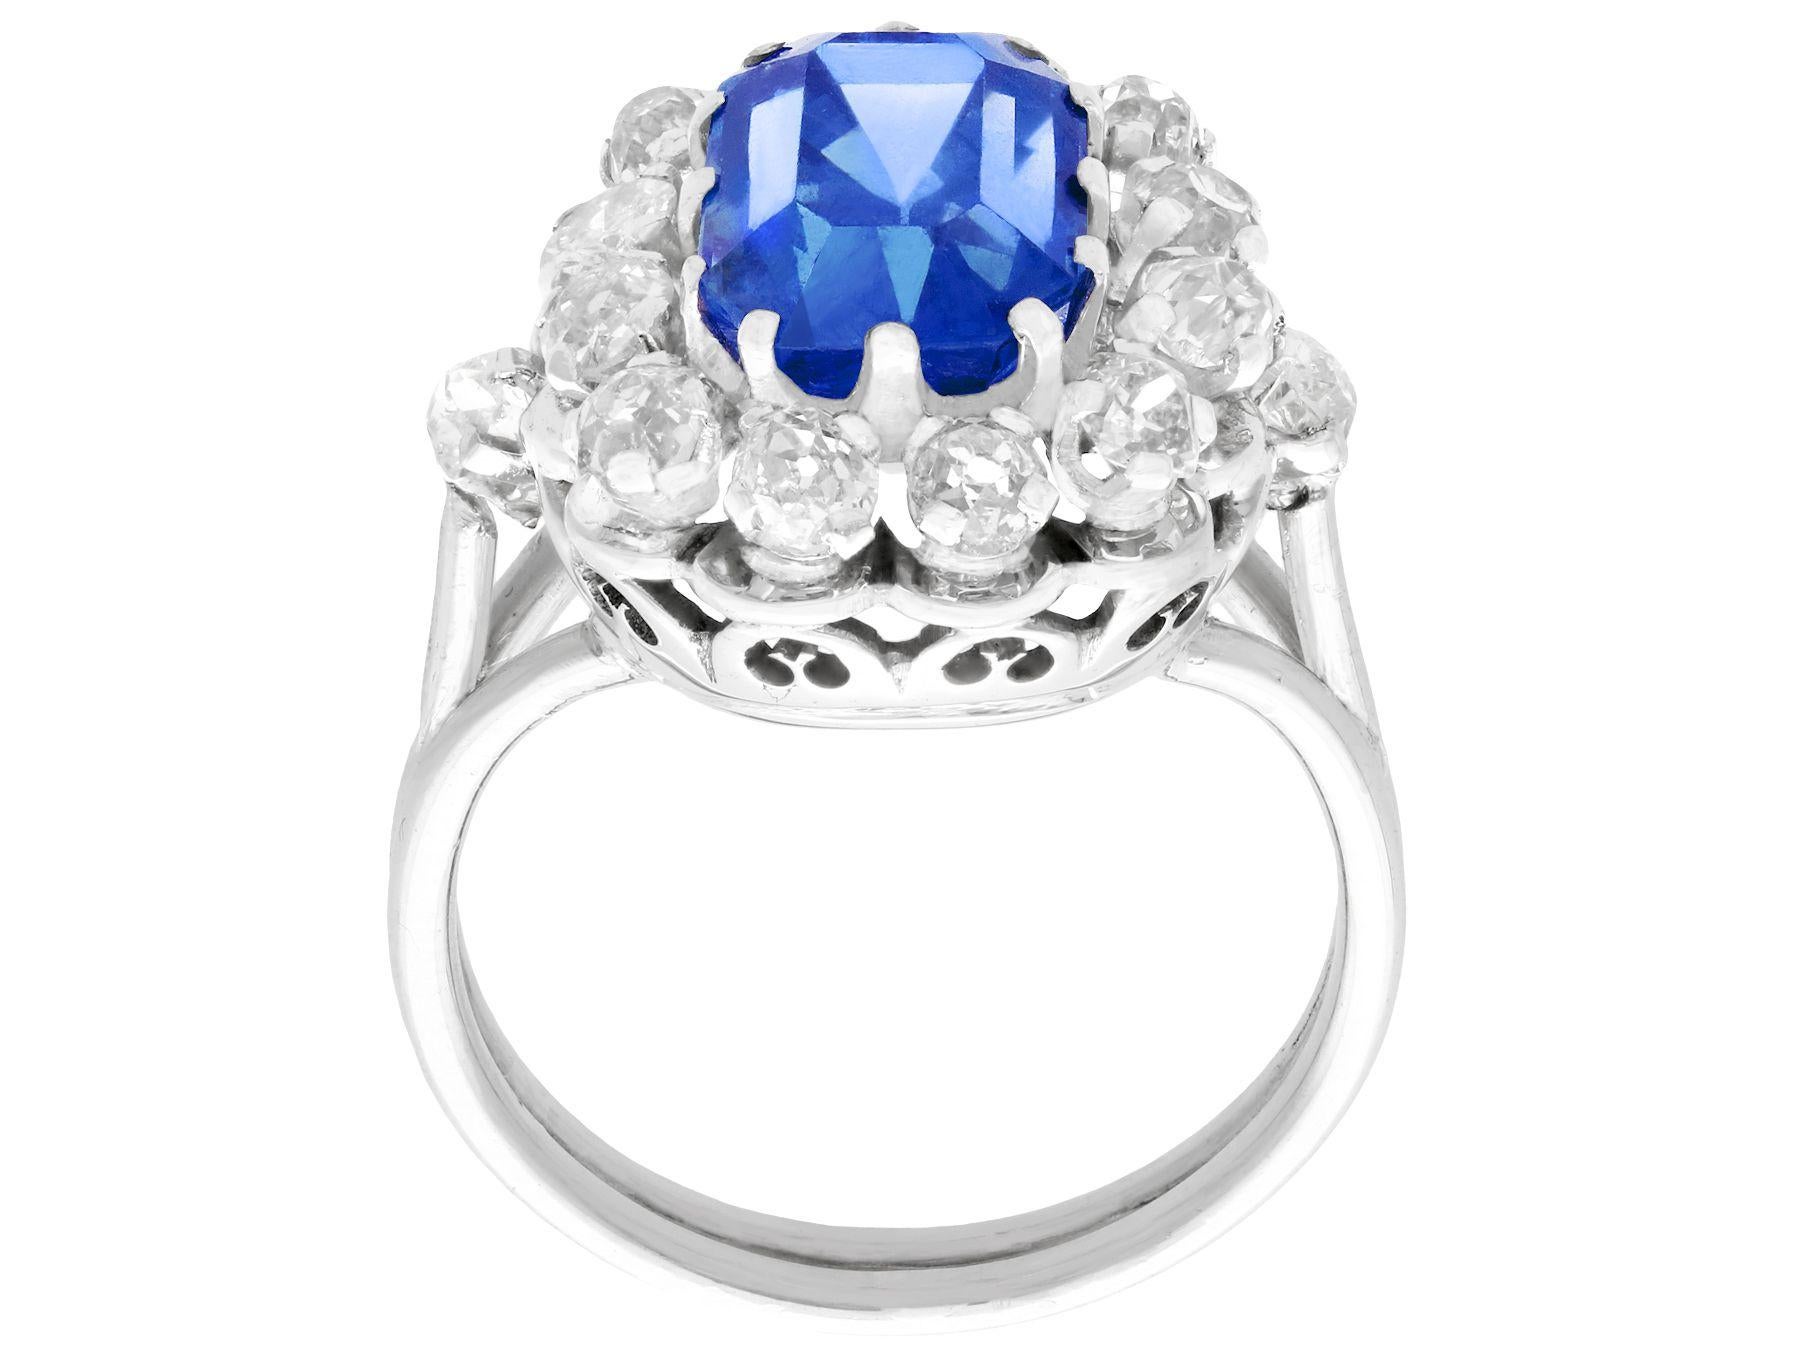 Women's Vintage 1960s 6.53 Carat Sapphire and Diamond 18k White Gold Cocktail Ring For Sale